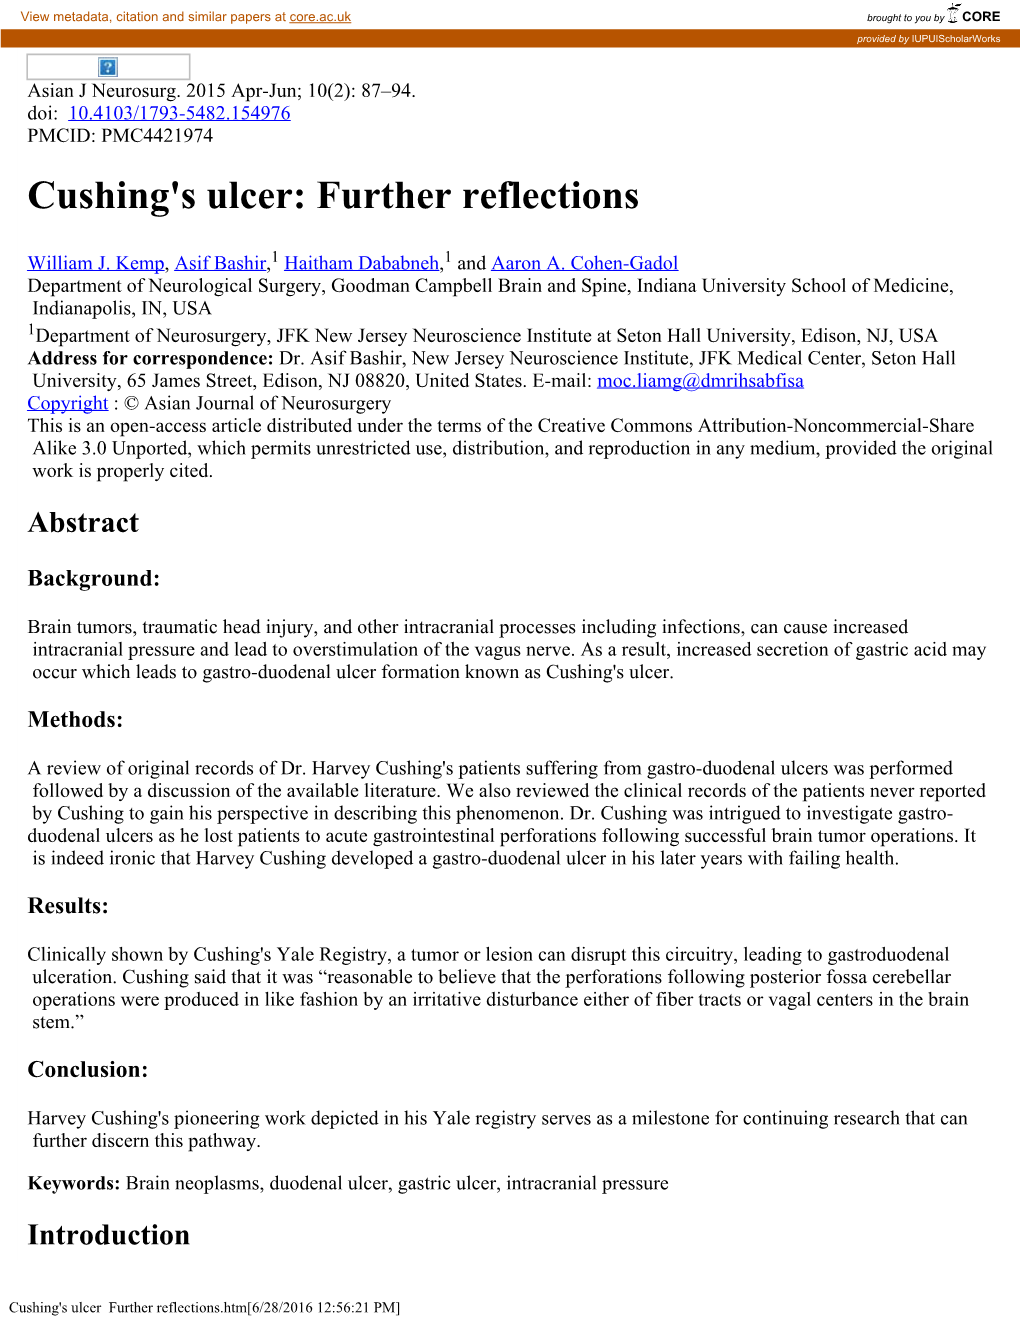 Cushing's Ulcer: Further Reflections